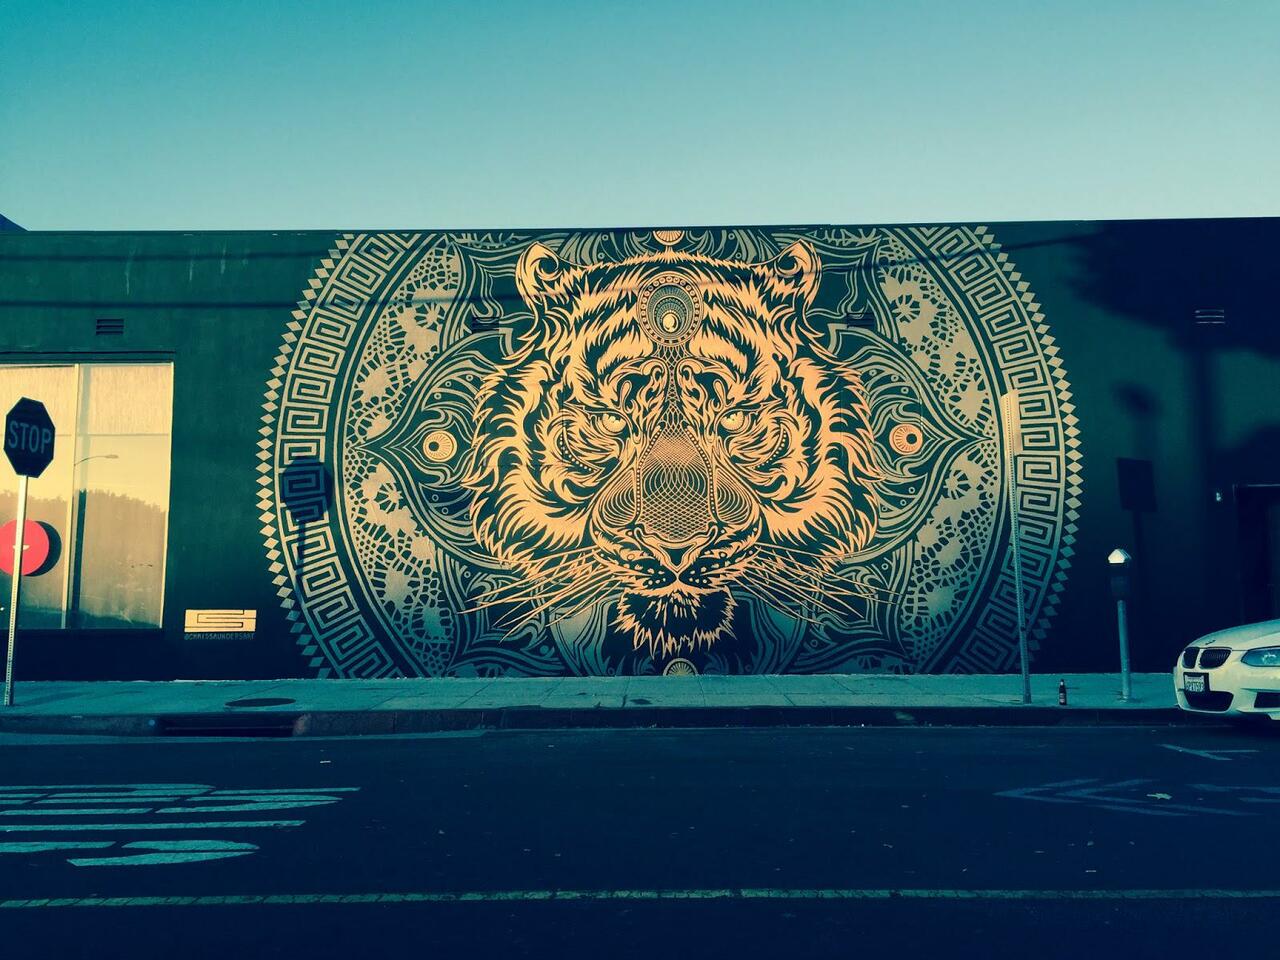 Chris Saunders unveils a new mural in Los Angeles, USA. #StreetArt #Graffiti #Mural http://t.co/960gT5ZT1L